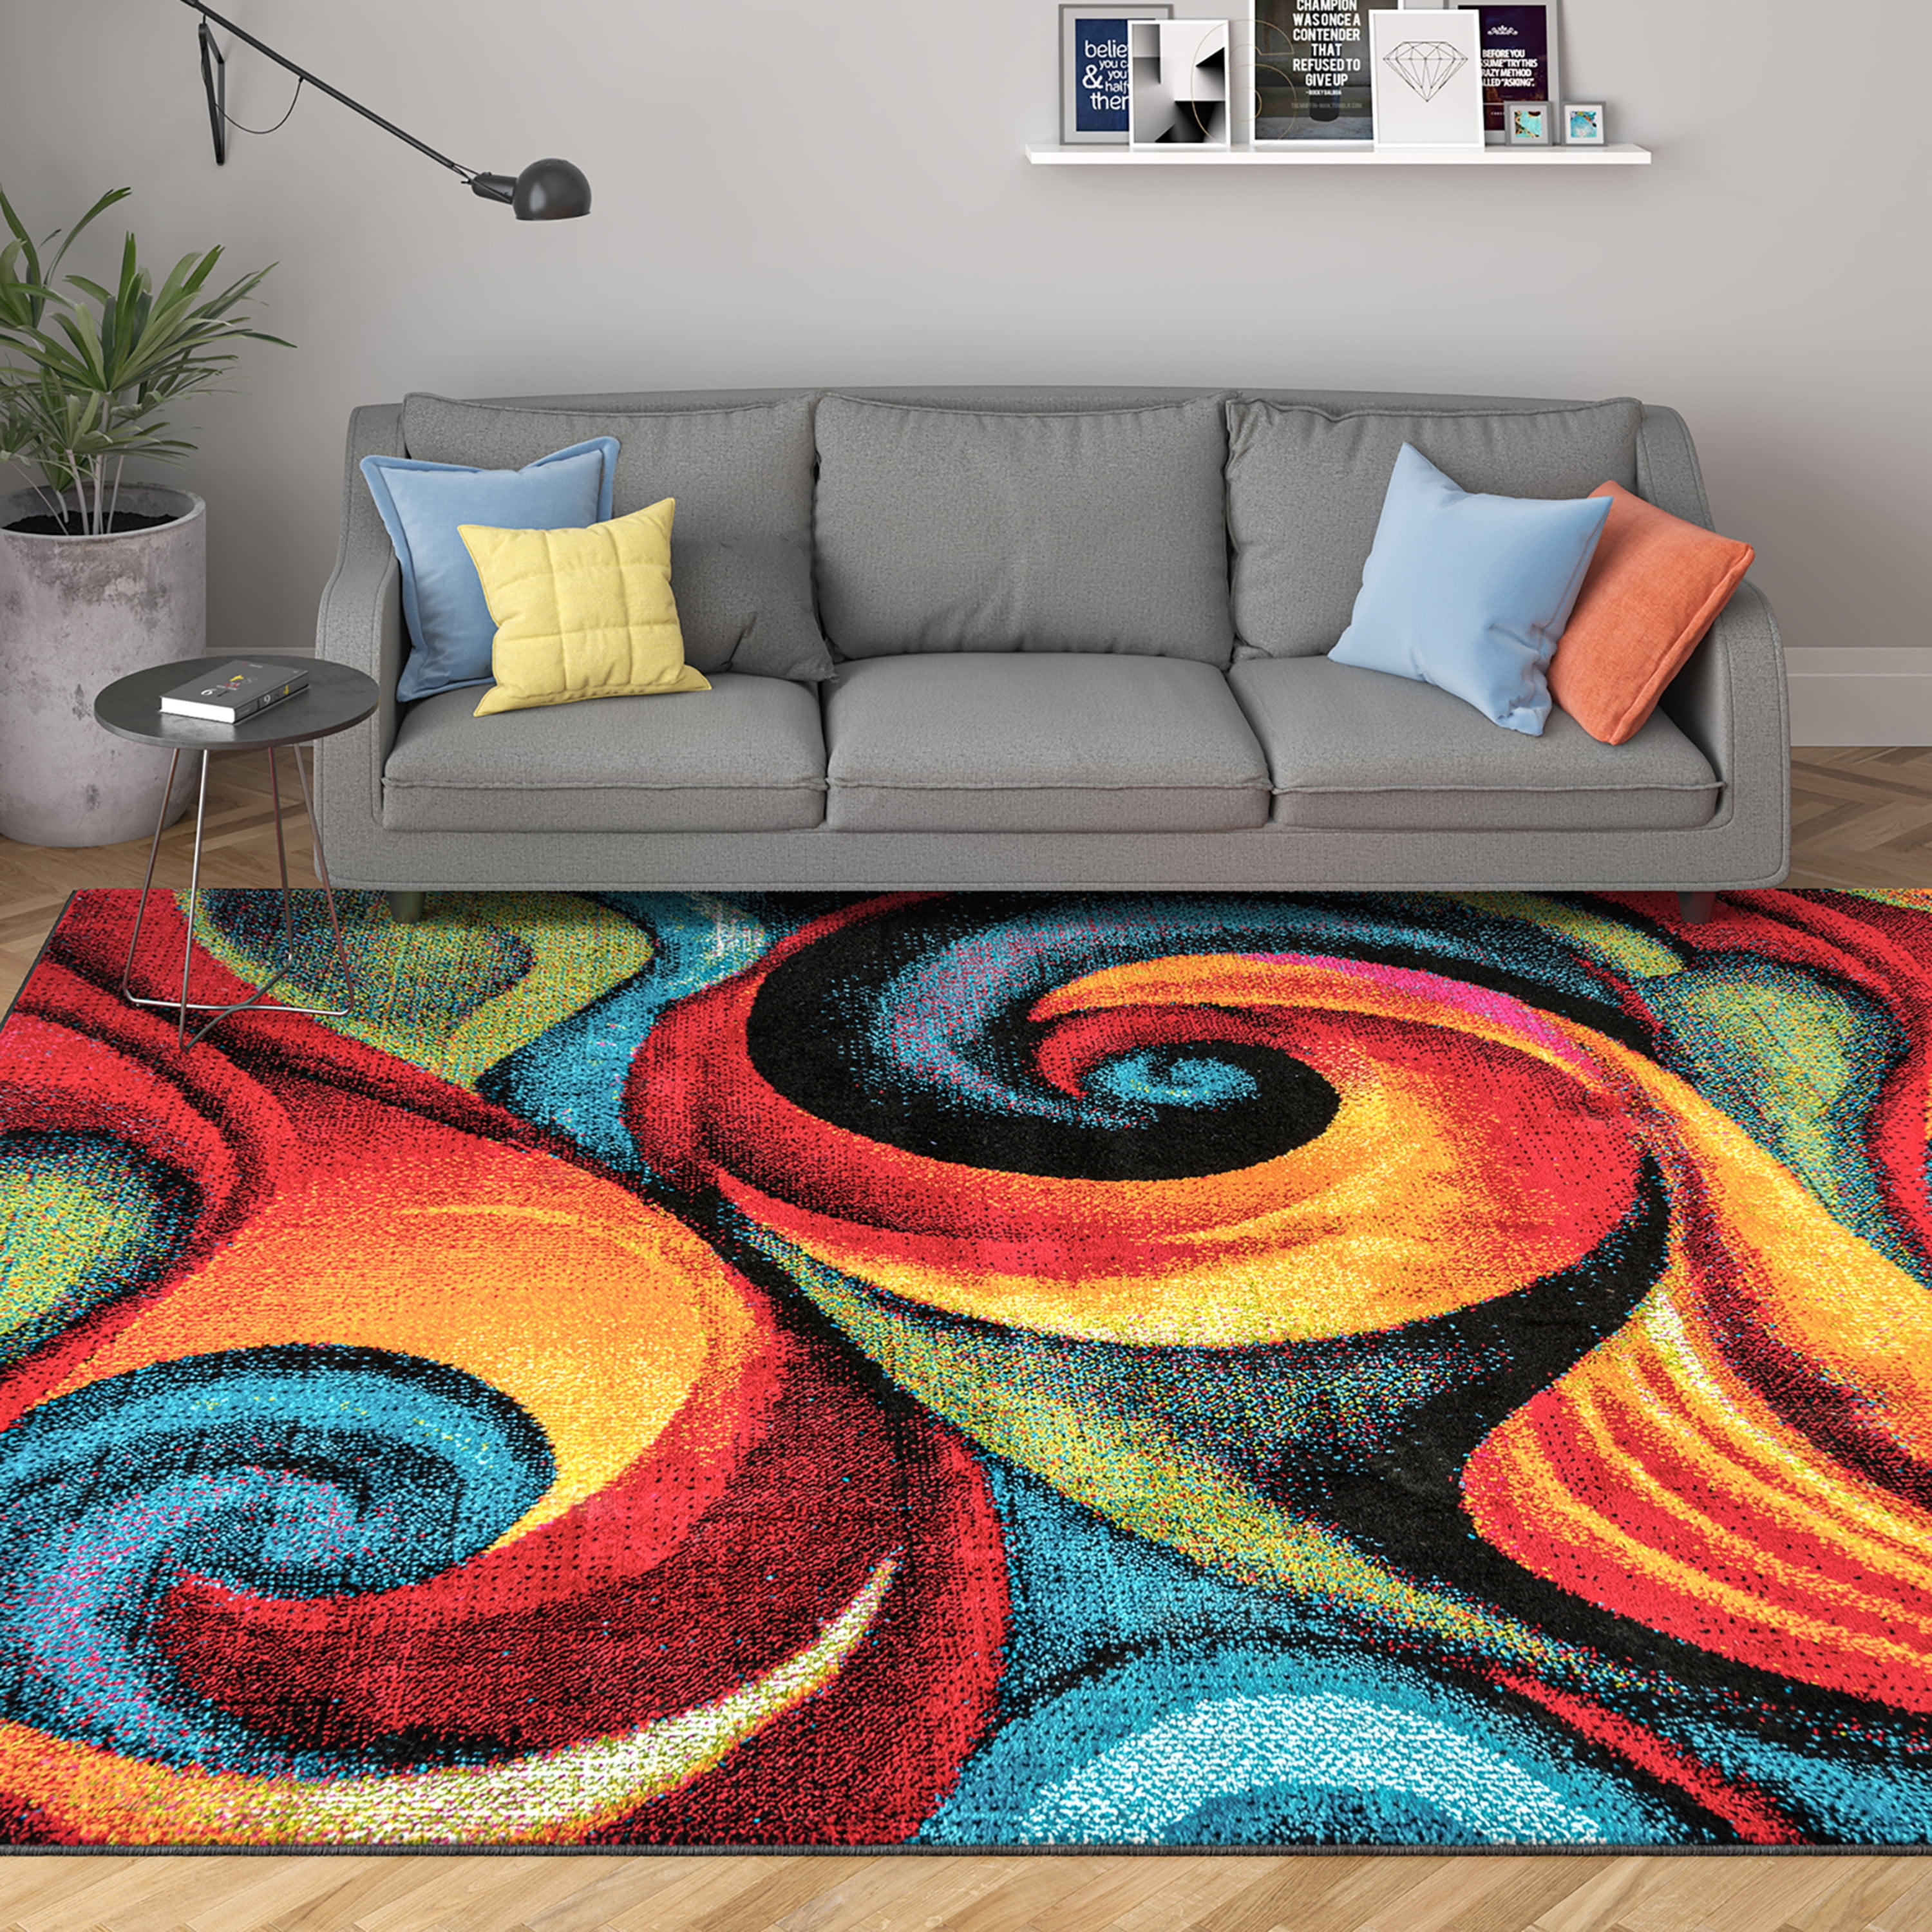 Bliss Rugs Tempest Abstract Area Rug, 94 in x 123 in